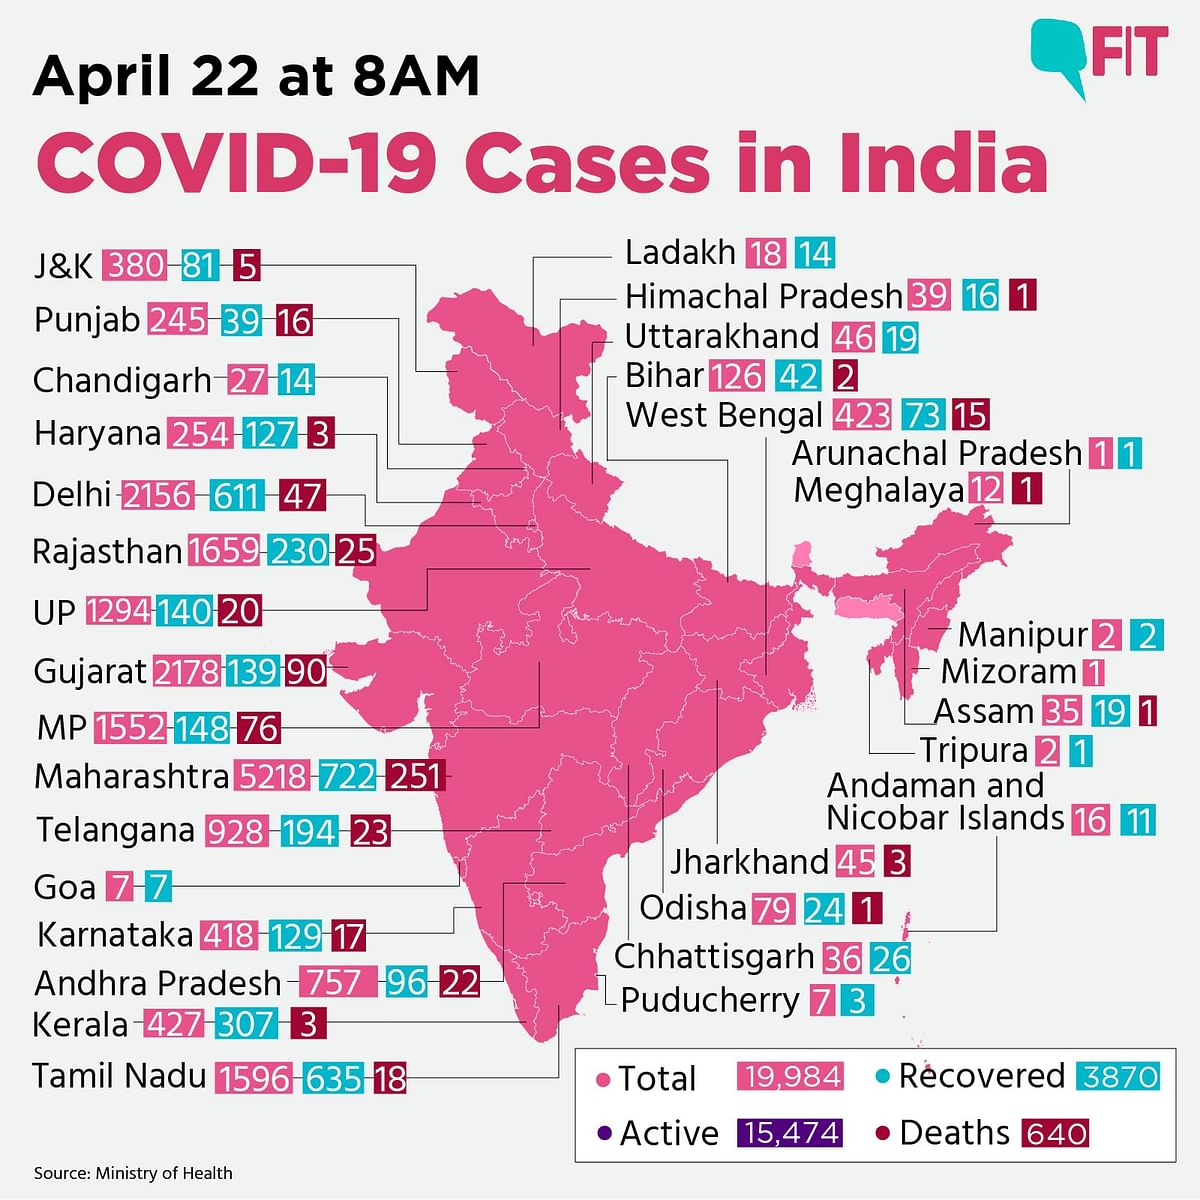 COVID-19 India Update: Cases Near 20,000, Deaths at 640